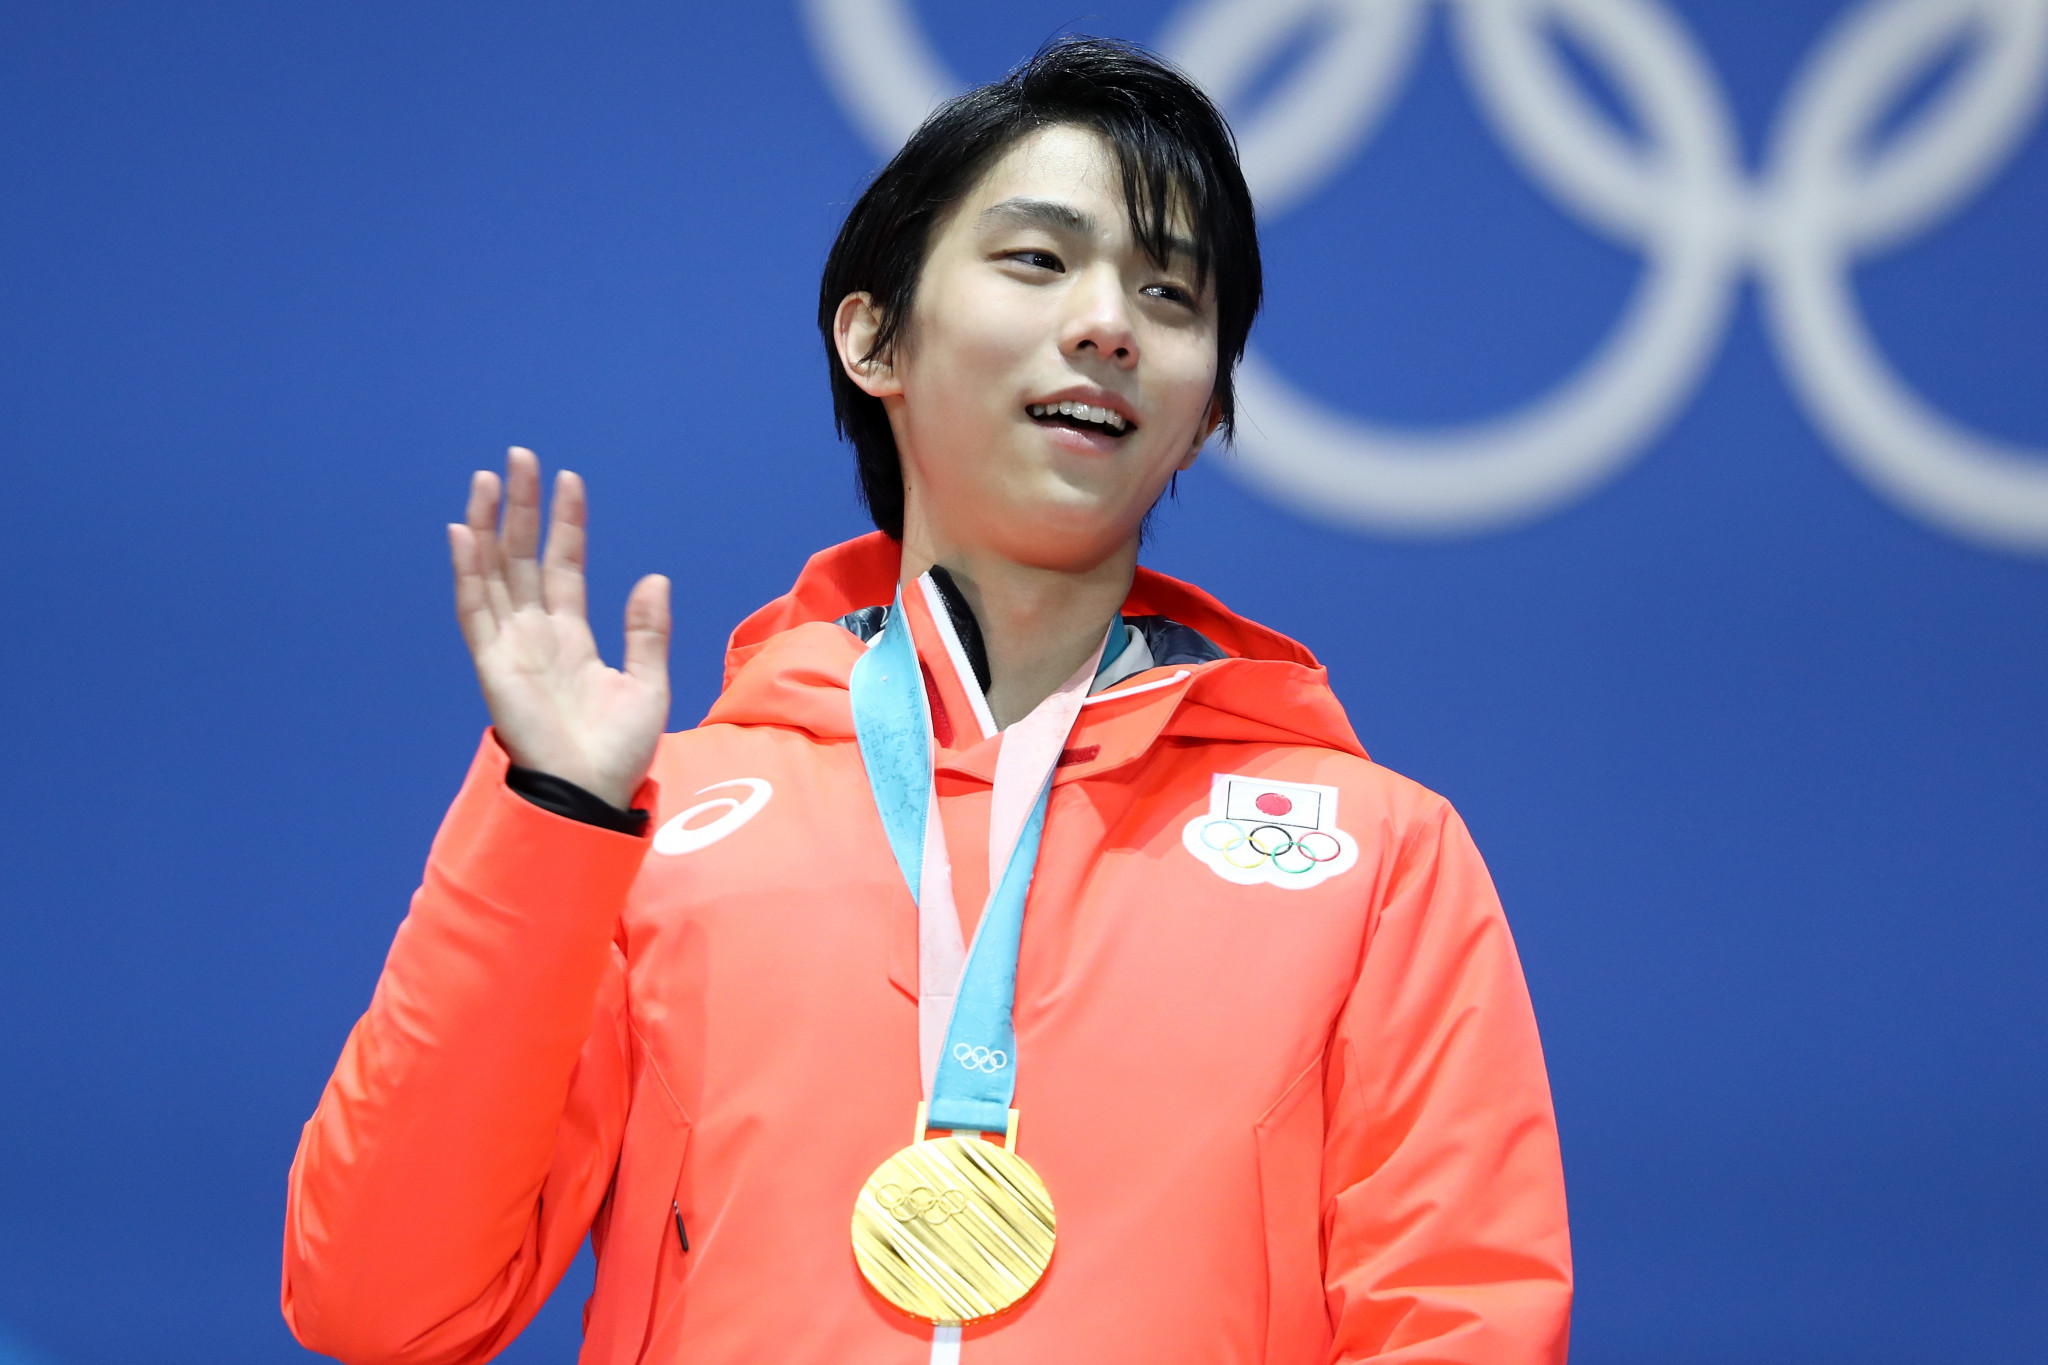 At Pyeongchang 2018, Yuzuru Hanyu of Japan became the first person since 1952 to retain an Olympic men's singles gold medal in figure skating ©Getty Images